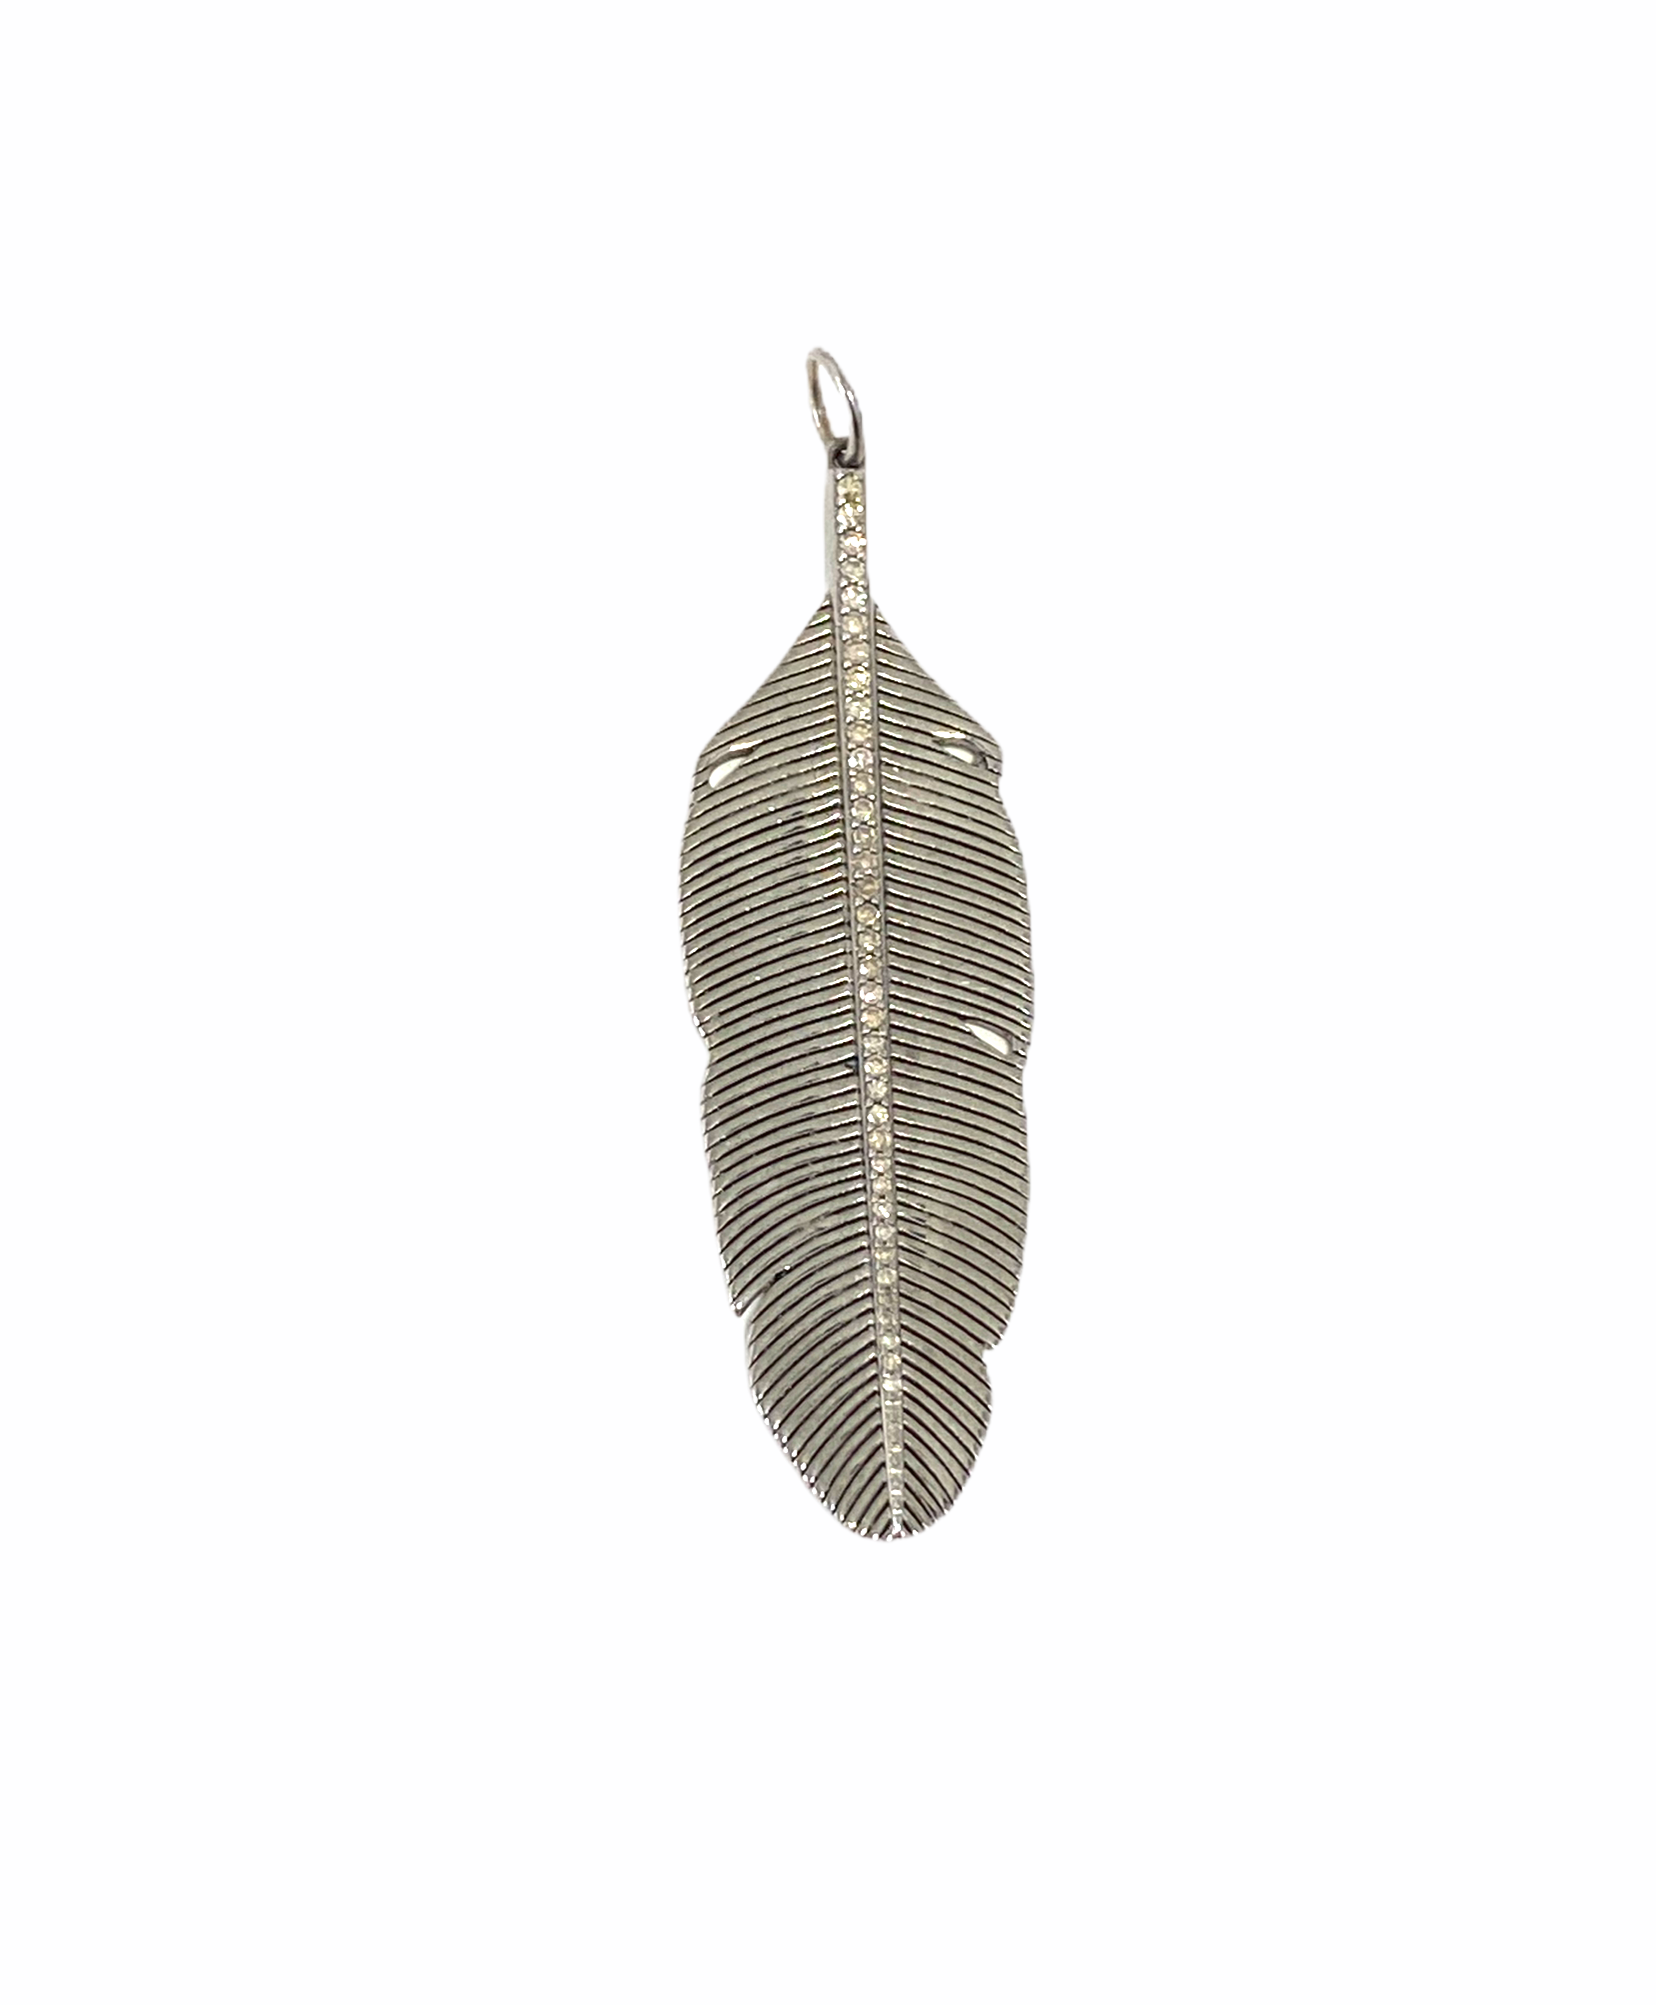 S.Row Designs Sterling Silver Feather Pendant